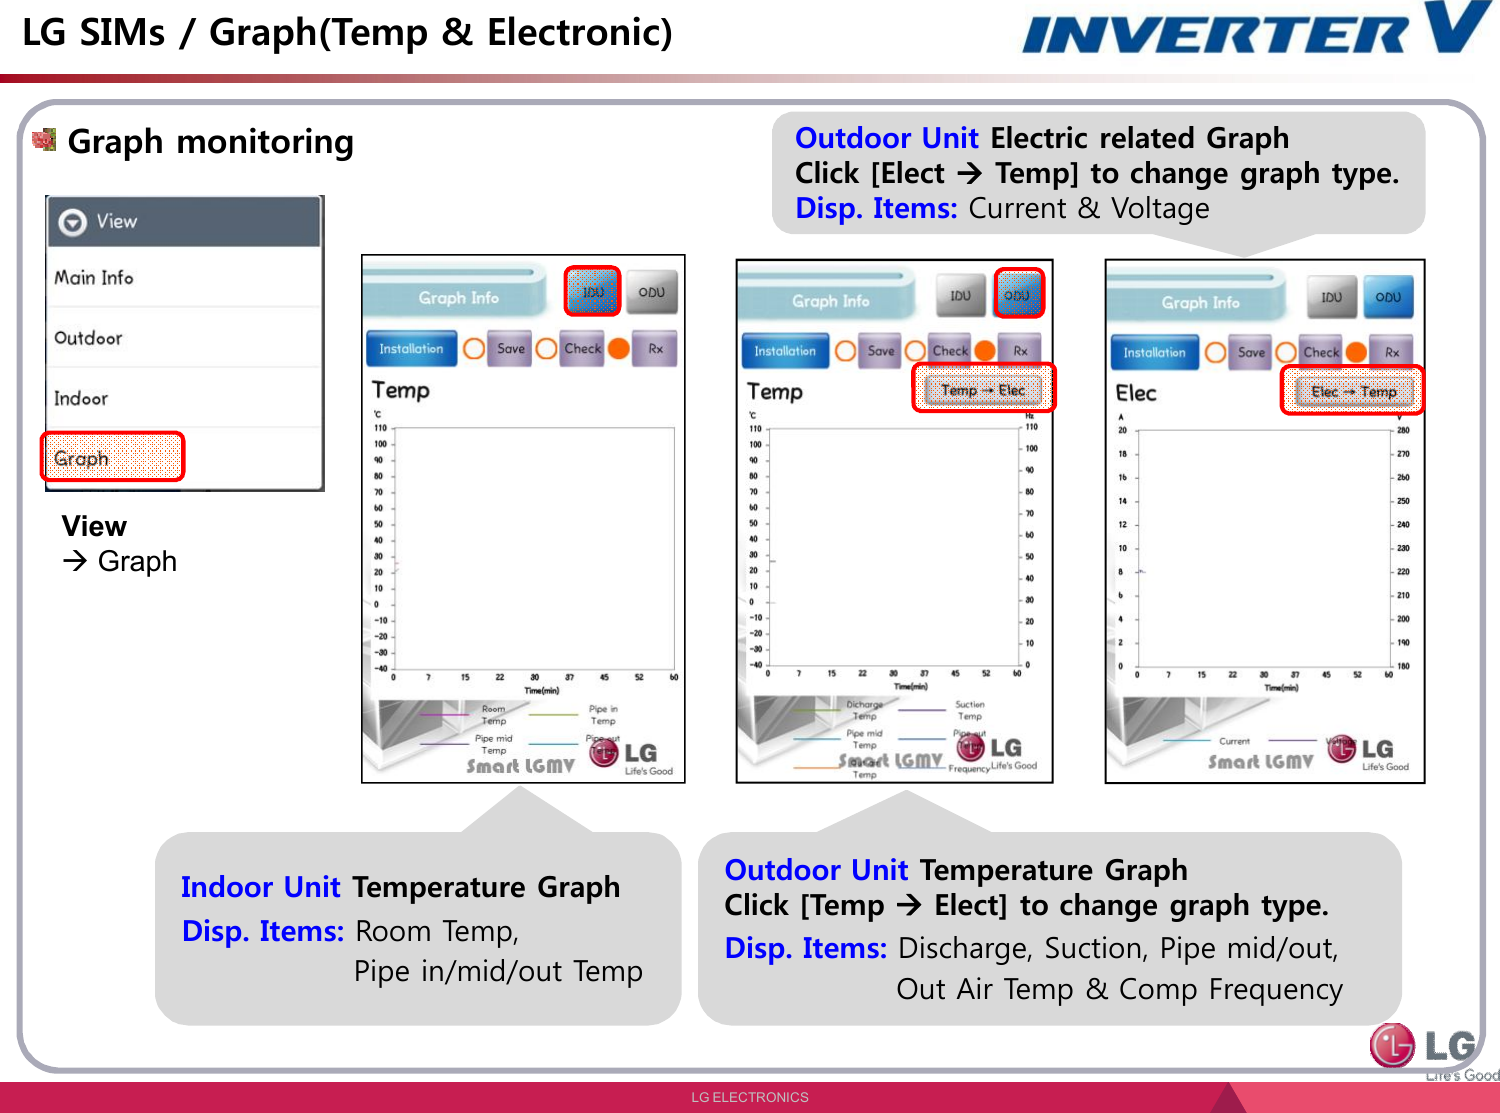 LG ELECTRONICSLG SIMs / Graph(Temp &amp; Electronic)View GraphIndoor Unit Temperature GraphDisp. Items: Room Temp,Pipe in/mid/out TempOutdoor Unit Temperature Graph  Click [Temp Elect] to change graph type.Disp. Items: Discharge, Suction, Pipe mid/out,Out Air Temp &amp; Comp FrequencyOutdoor Unit Electric related Graph  Click [Elect Temp] to change graph type.Disp. Items: Current &amp; VoltageGraph monitoring